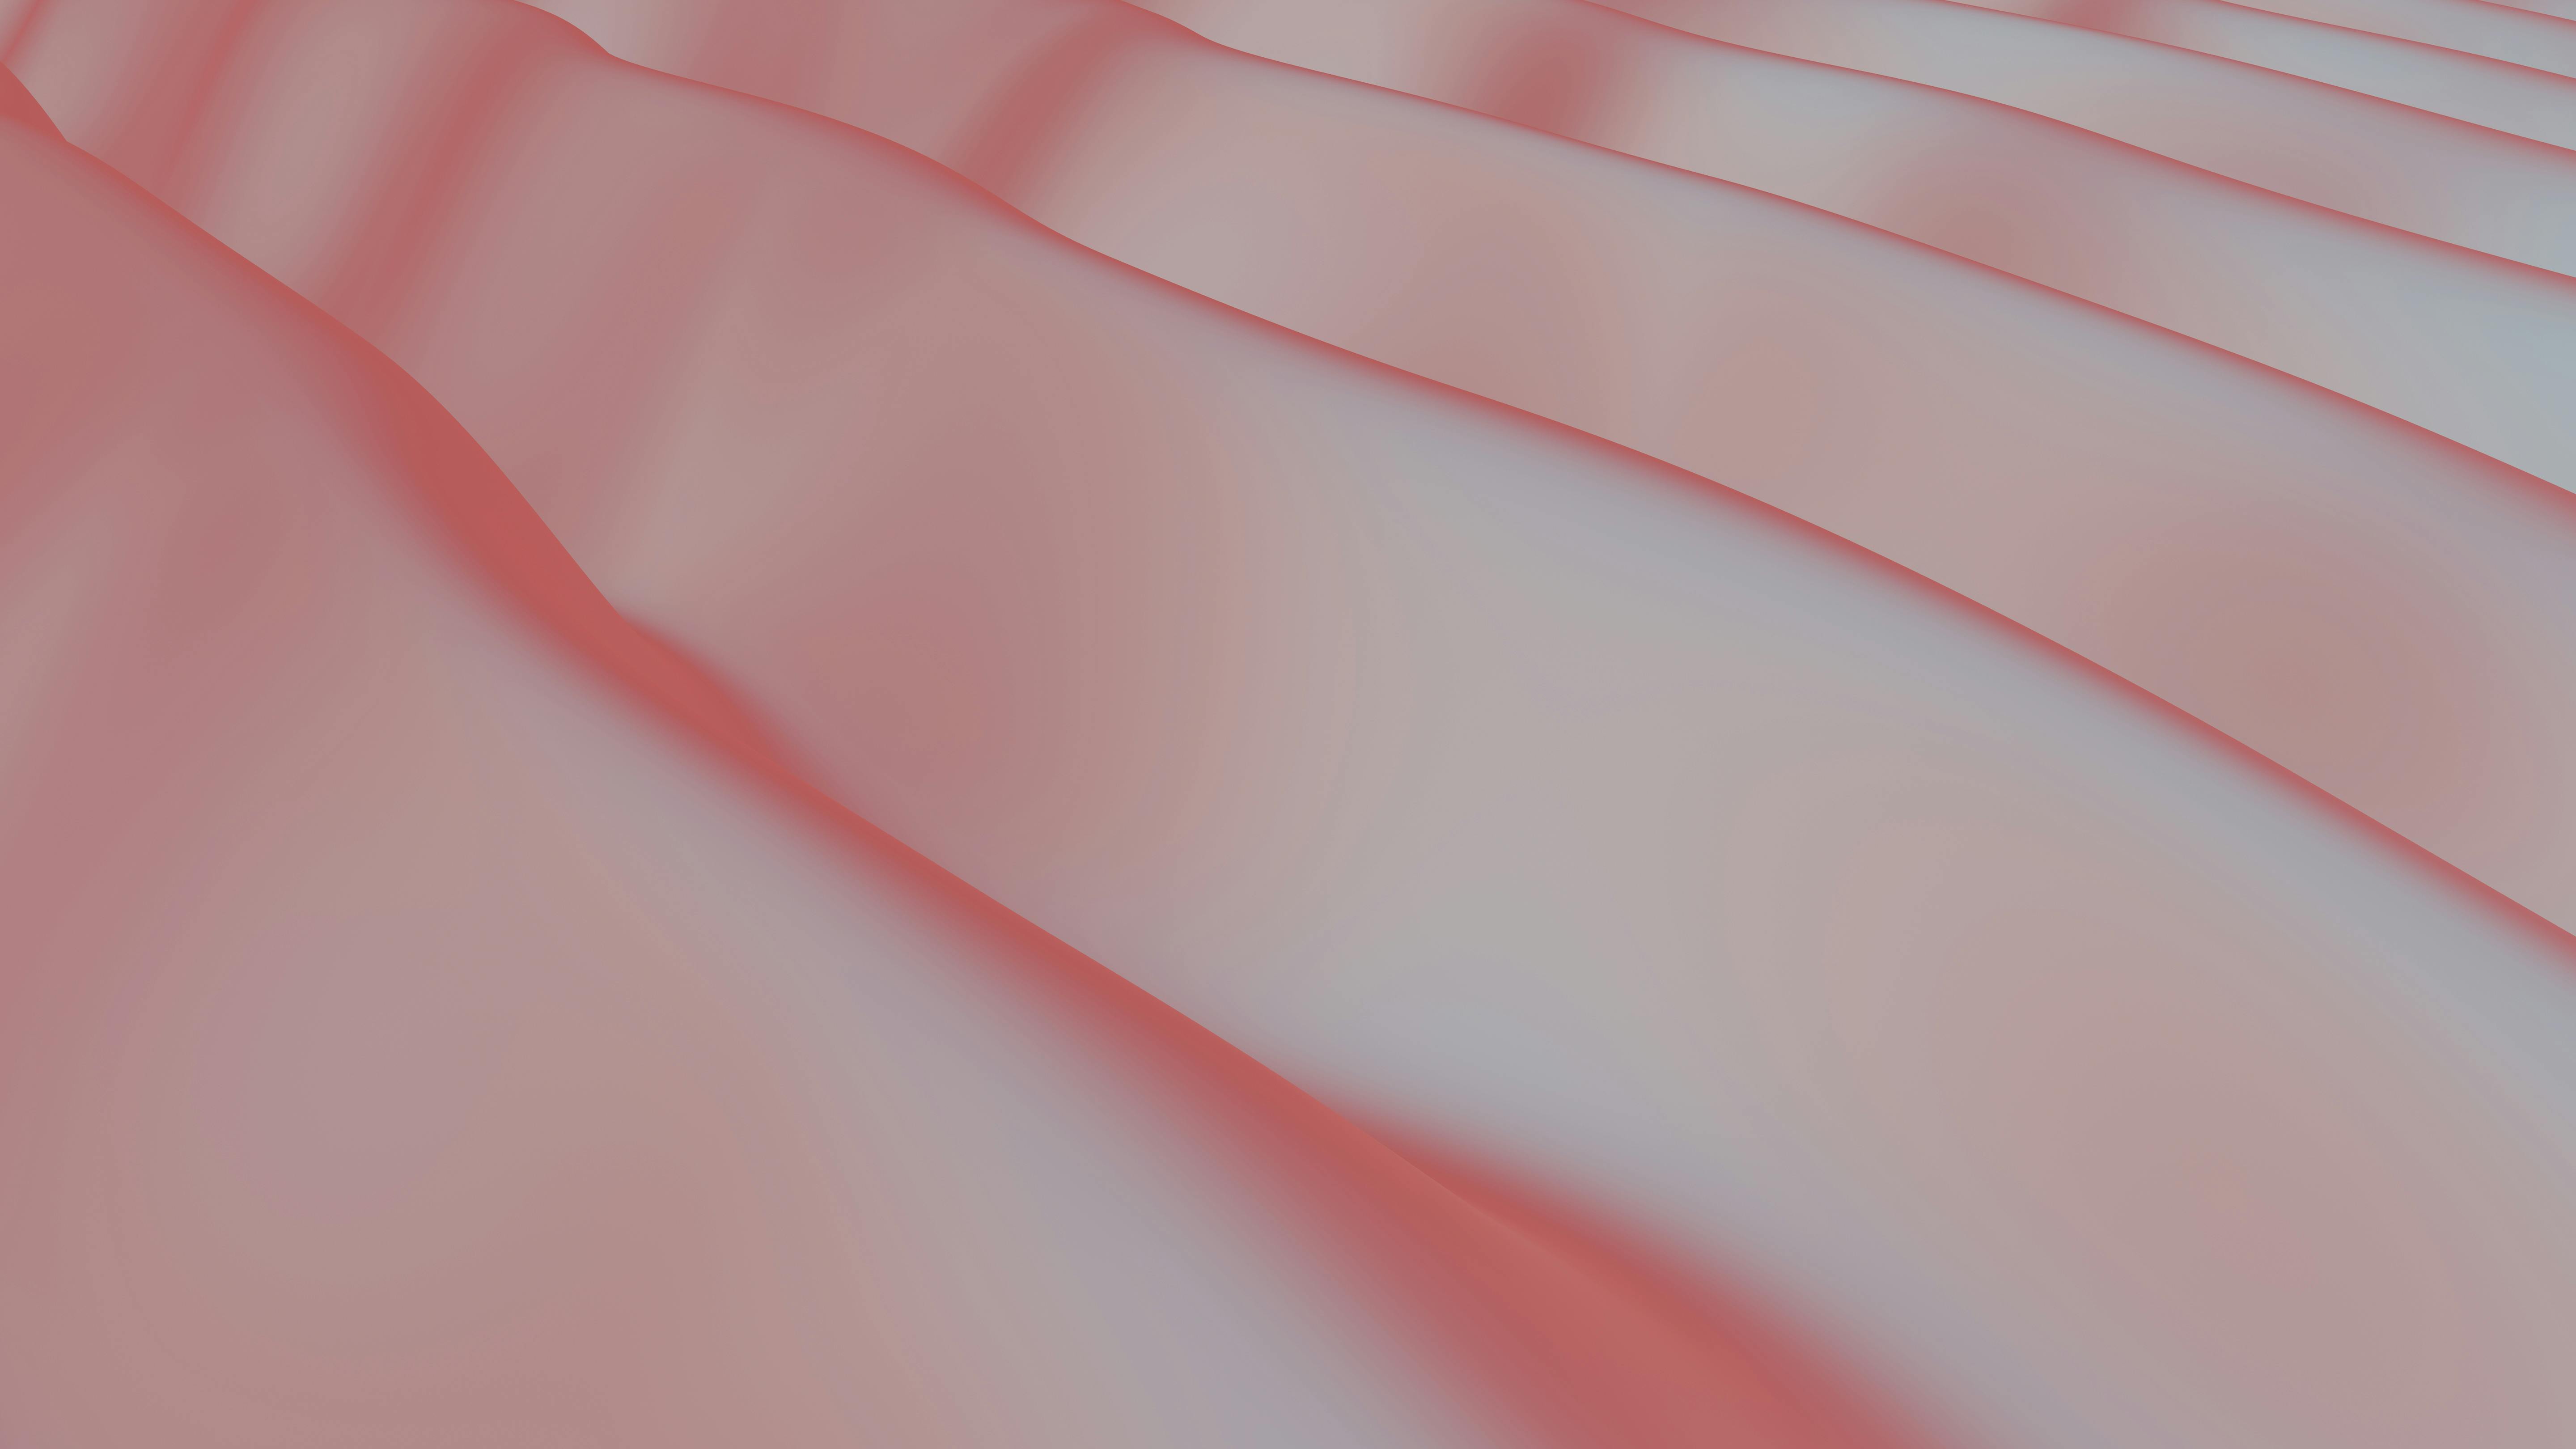 Red and Pink Gradient Texture - Free Stock Photo by Ivan on